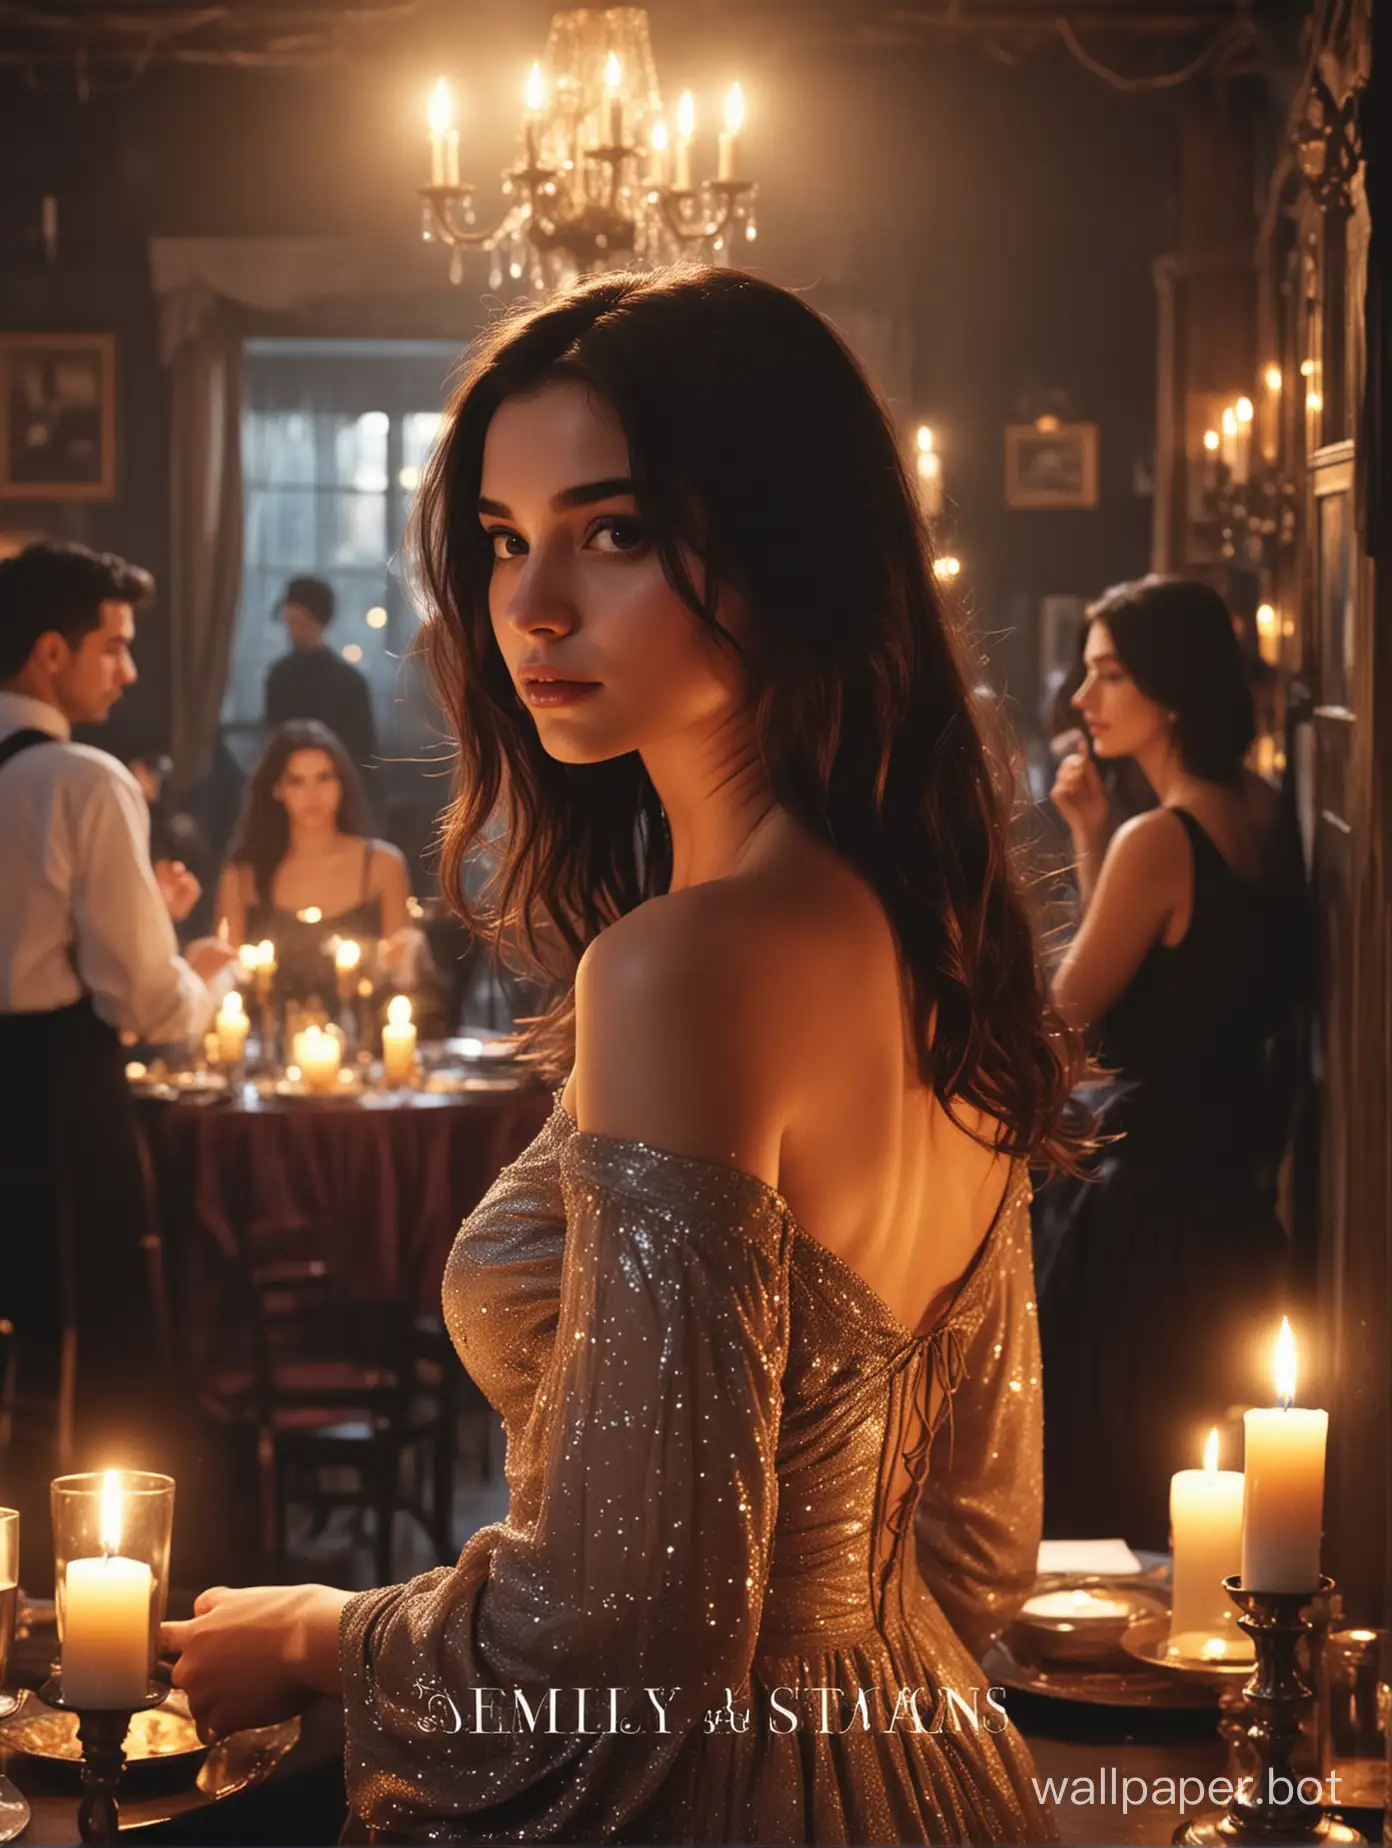 On the cover of the book is depicted a 19-year-old girl with thick, dark hair cascading down her back. She stands at a closed party in a restaurant, surrounded by noisy guests and bright candle lights. Her gaze is directed into the distance, as if she is searching for something or someone. The girl is dressed in a luxurious dress, emphasizing her slender figure and mysterious allure. The background of the cover may be dark, with reflections of light from candles and bright lamps, creating an atmosphere of mystery and magic.